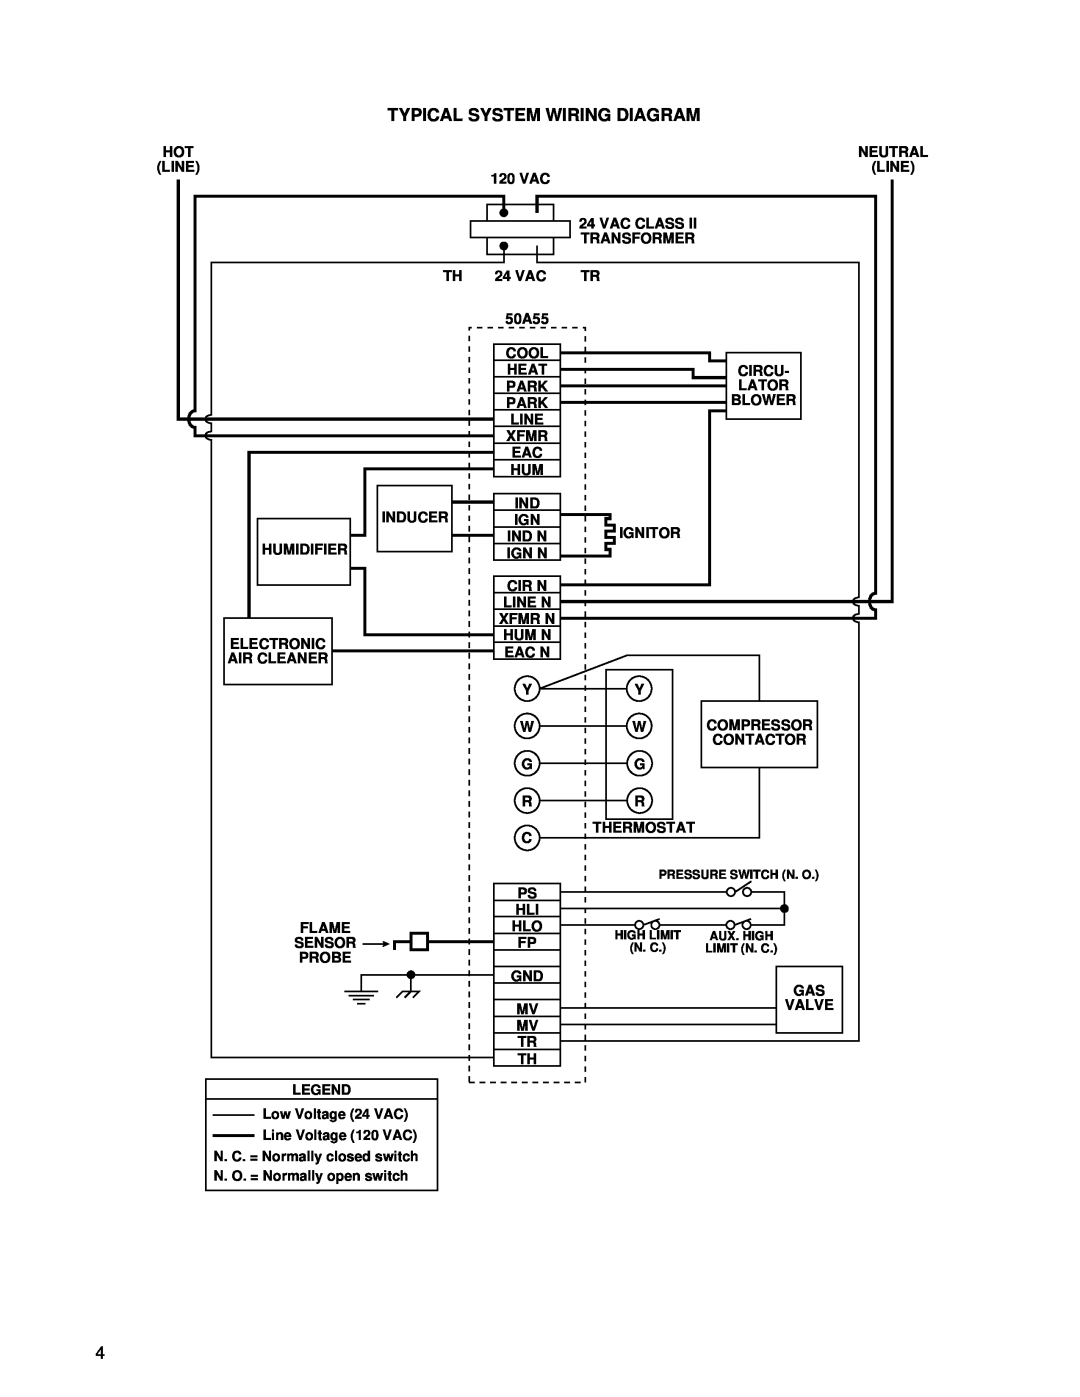 White Rodgers 50A55-438 installation instructions Typical System Wiring Diagram 